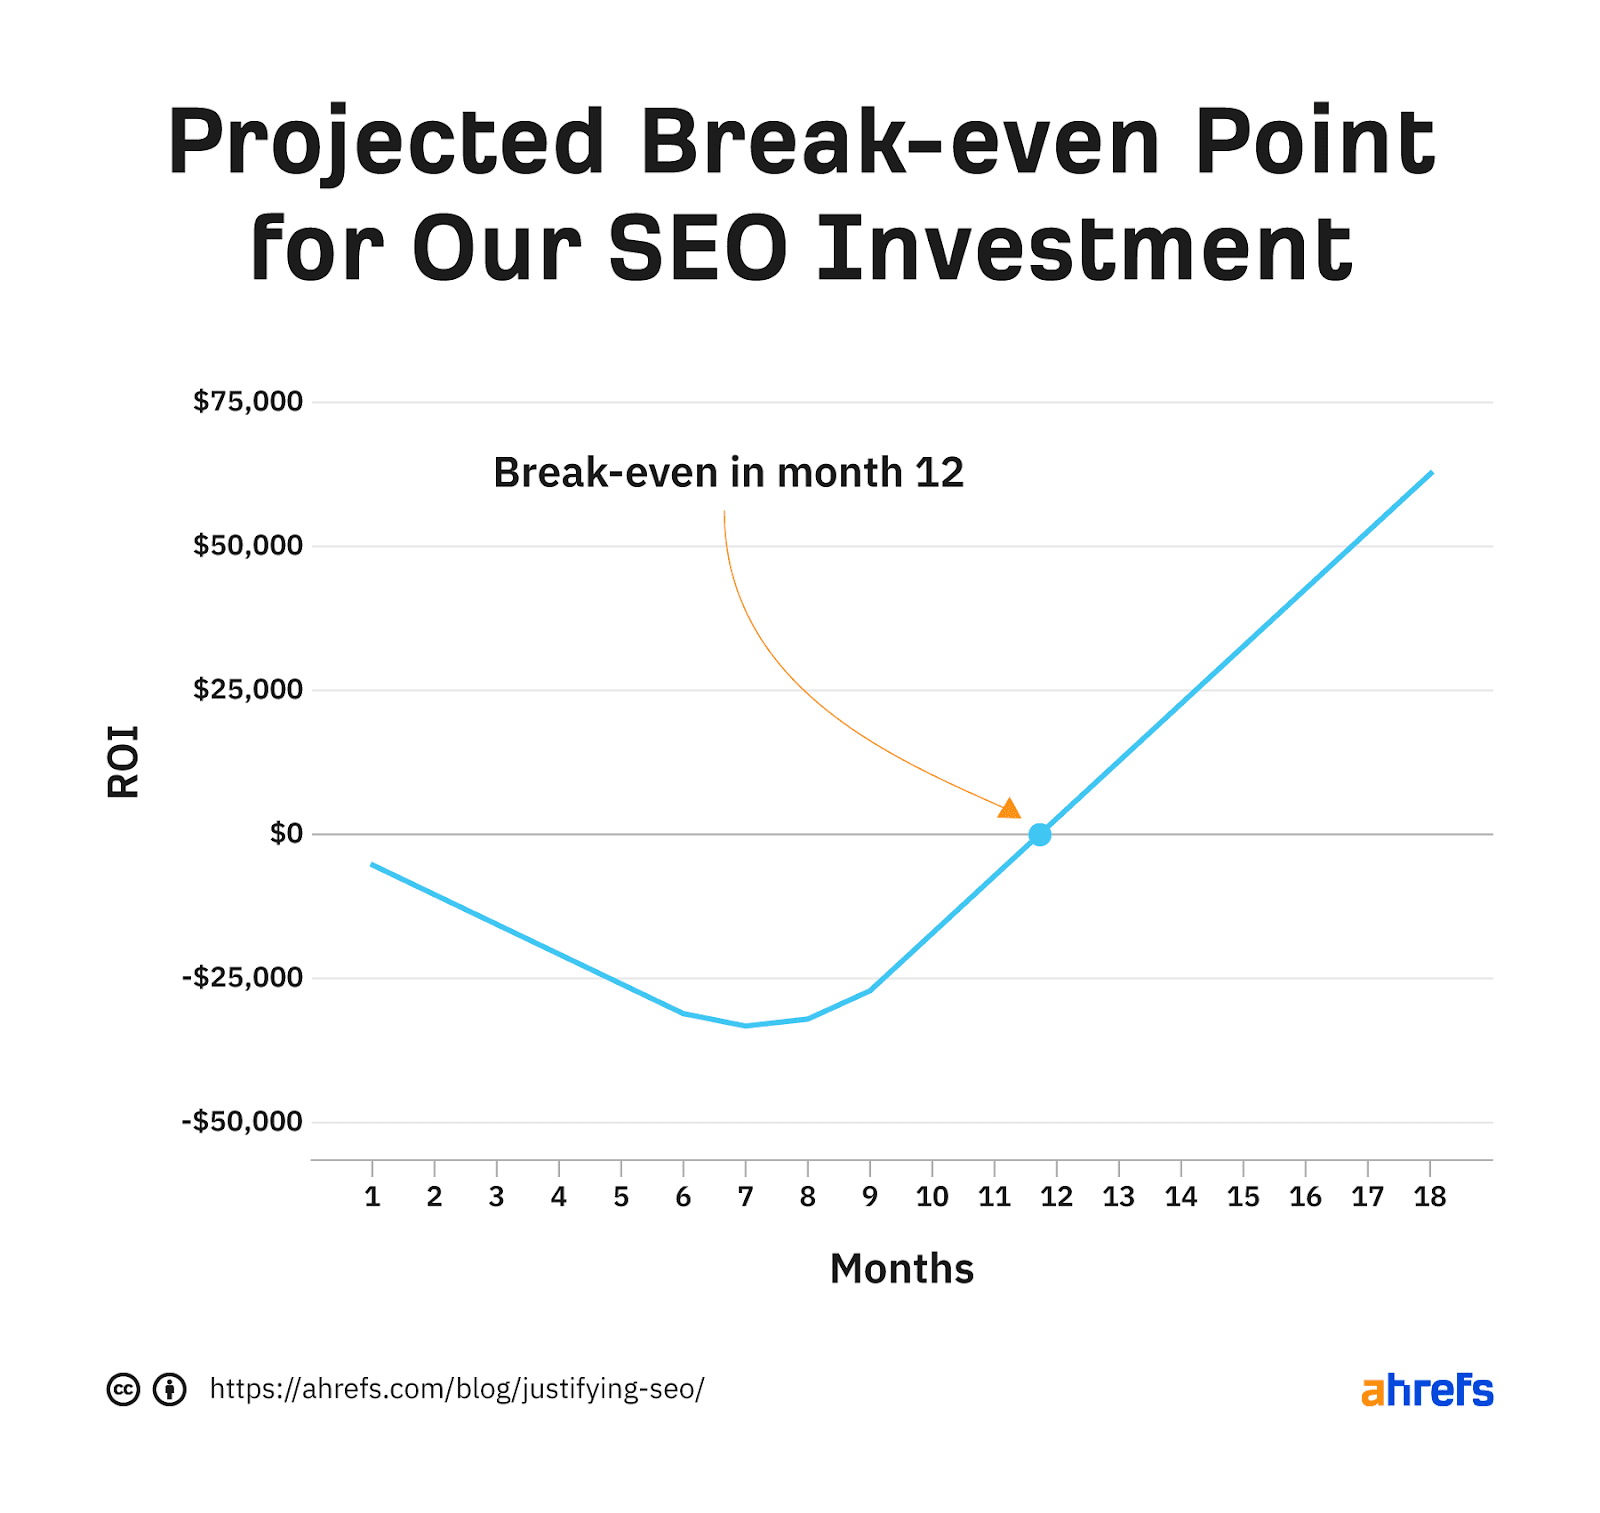 Chart showing projected break-even for SEO investment happens in month 12